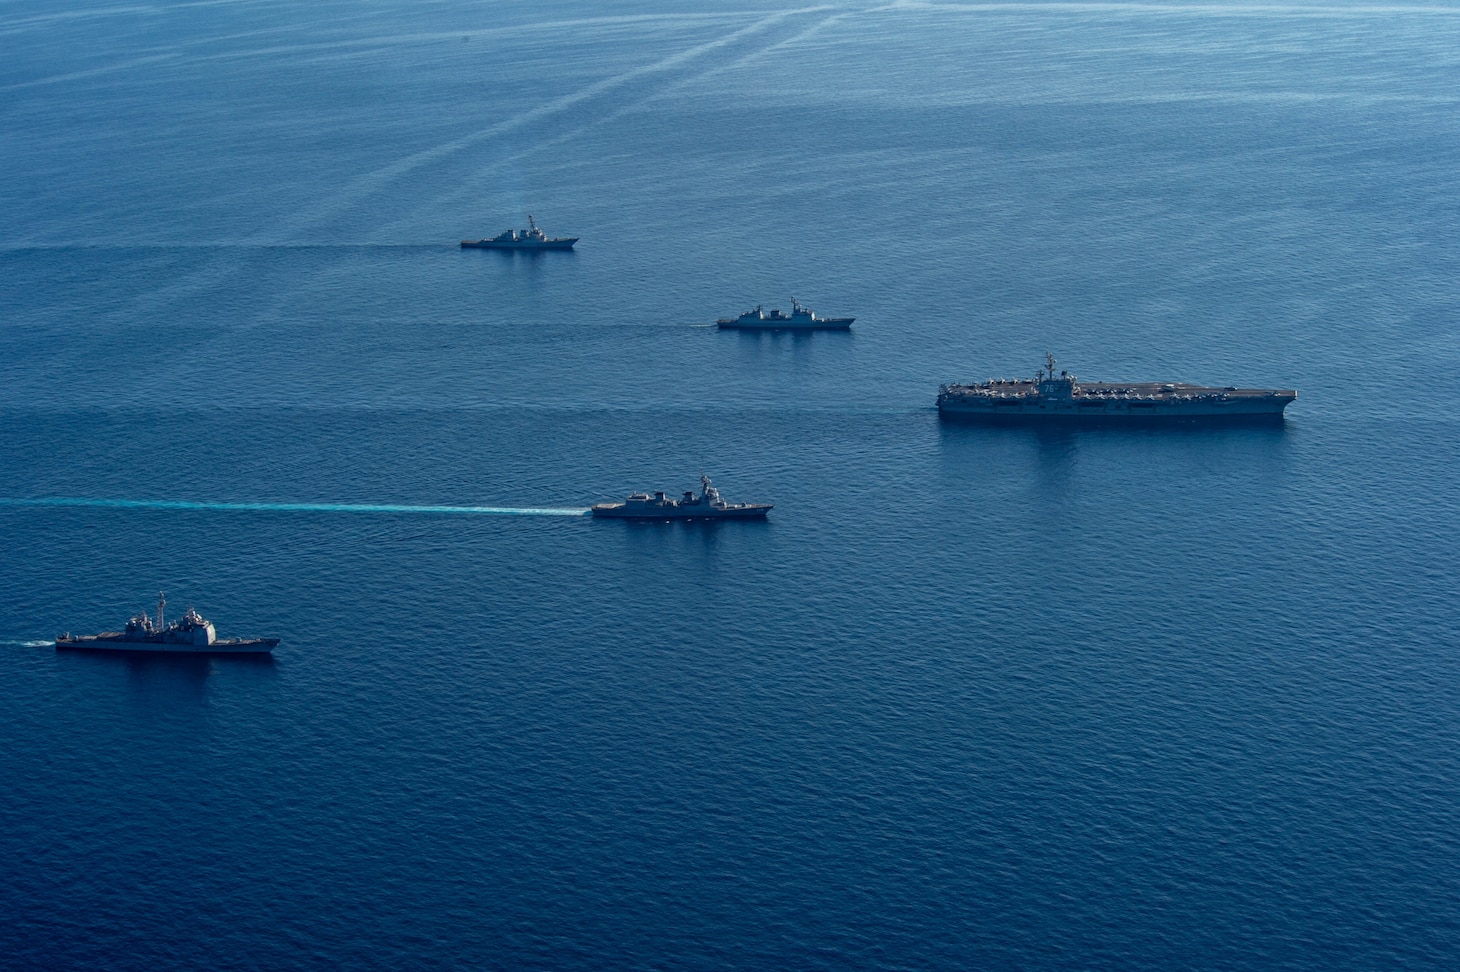 The U.S. Navy’s only forward-deployed aircraft carrier, USS Ronald Reagan (CVN 76), a U.S. Navy Los Angeles-class fast-attack submarine, Ticonderoga-class guided-missile cruiser USS Chancellorsville (CG 62), Arleigh Burke-class guided-missile destroyer USS Benfold (DDG 65), Republic of Korea (ROK) Navy destroyer ROKS Munmu the Great (DDH 976), and Japan Maritime Self-Defense Force (JMSDF) destroyer JS Asahi (DD 119) steam in formation in waters east of the Korean Peninsula, Sept. 30. Ronald Reagan, operating as the flagship of Carrier Strike Group (CSG) 5 is conducting a trilateral anti-submarine warfare exercise with the JMSDF and ROK Navy. The operations between the Reagan Strike Group, JS Asahi, and ROKS Munmu The Great, involved operating with a U.S. submarine to enhance interoperability between the nations in support of a free and open Indo-Pacific.